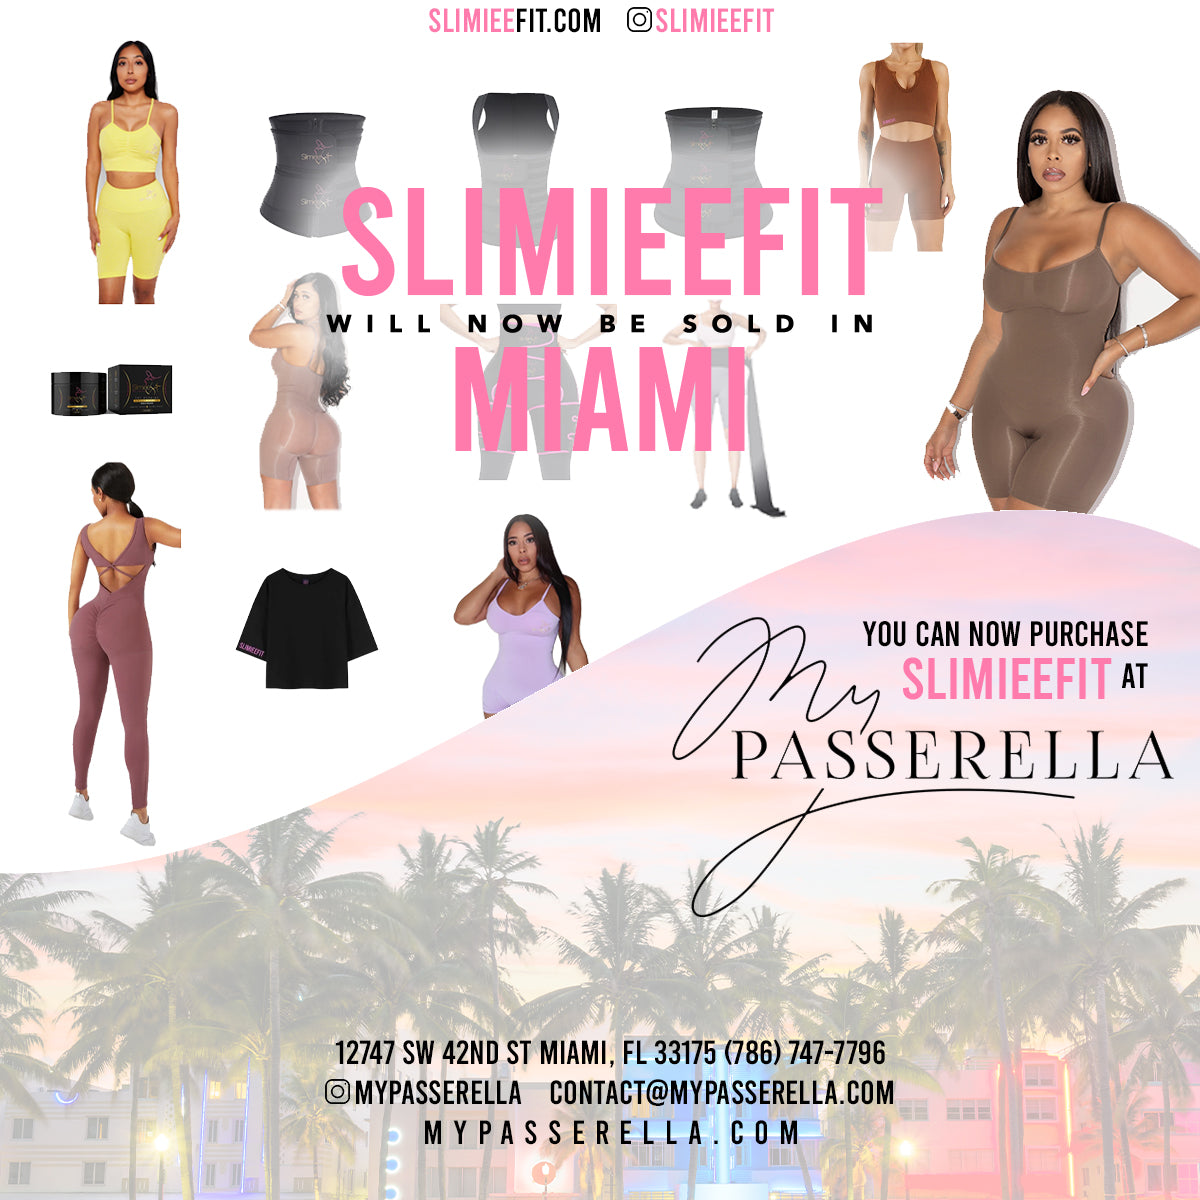 SLIMIEE FIT CAN NOW BE PURCHASED IN MIAMI!!